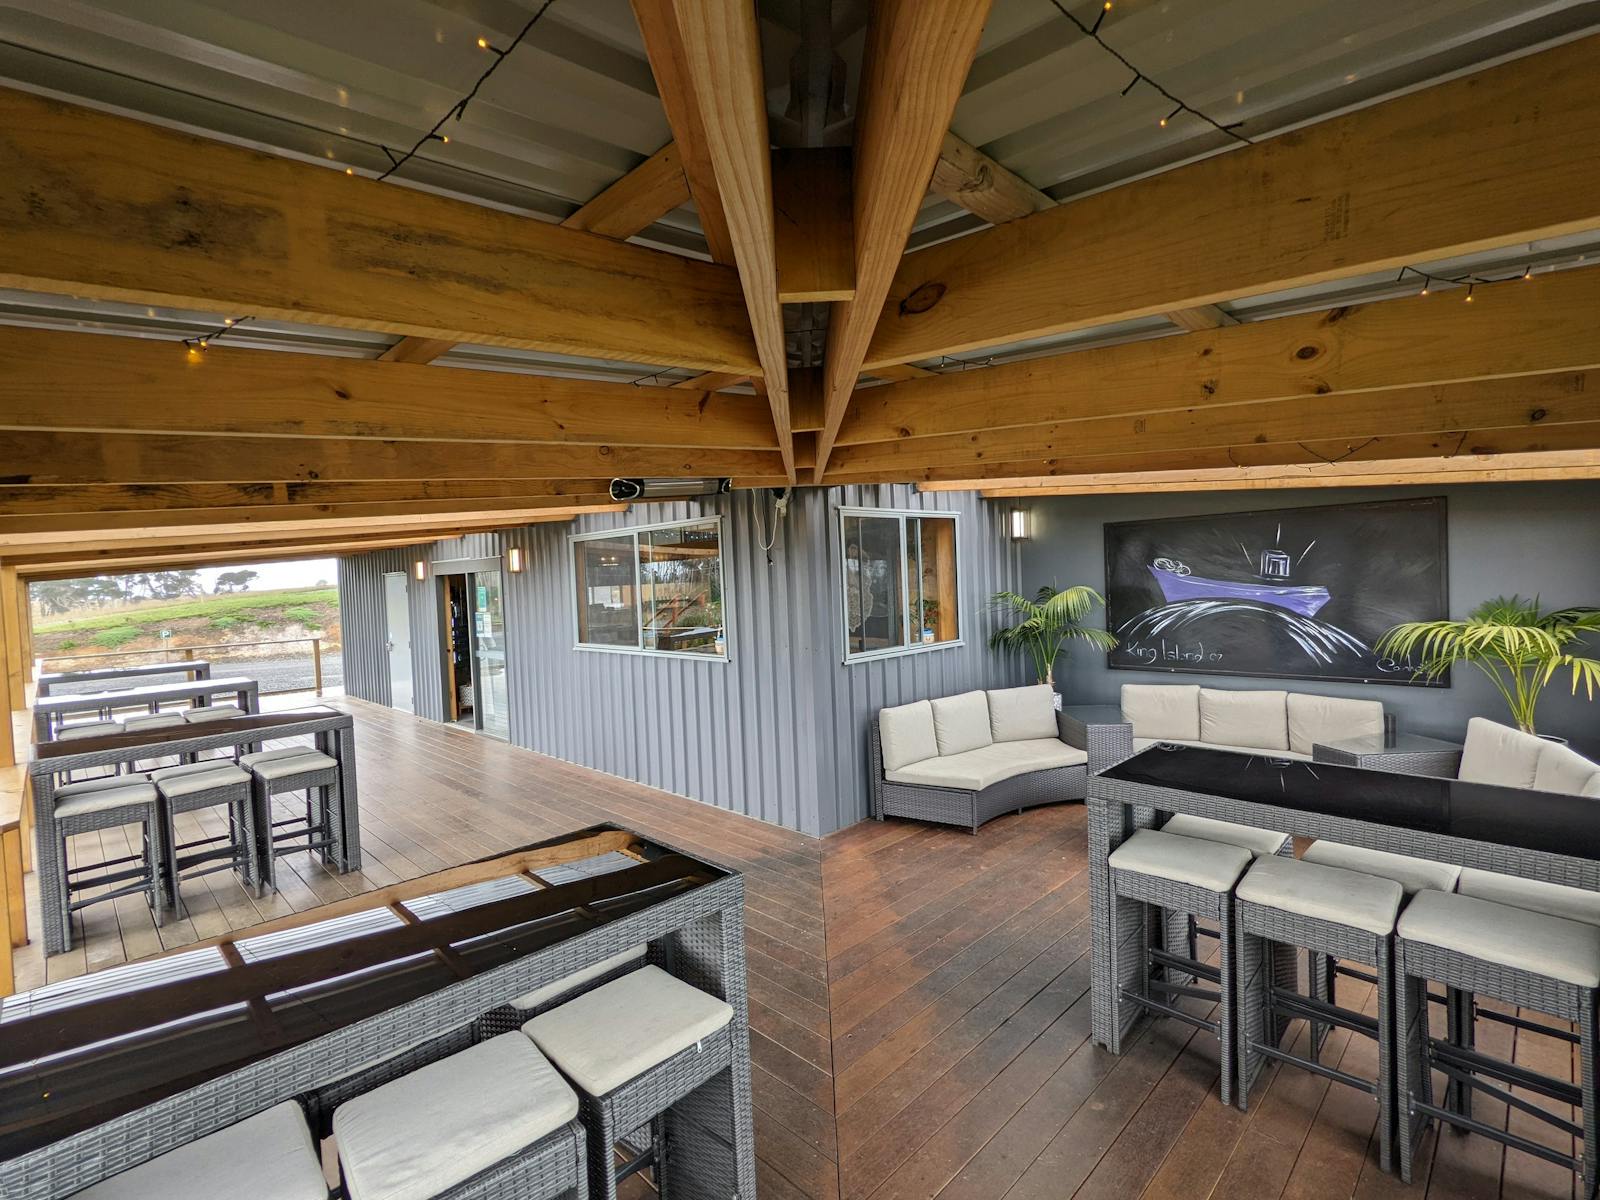 Deck seating area at King Island Brewhouse